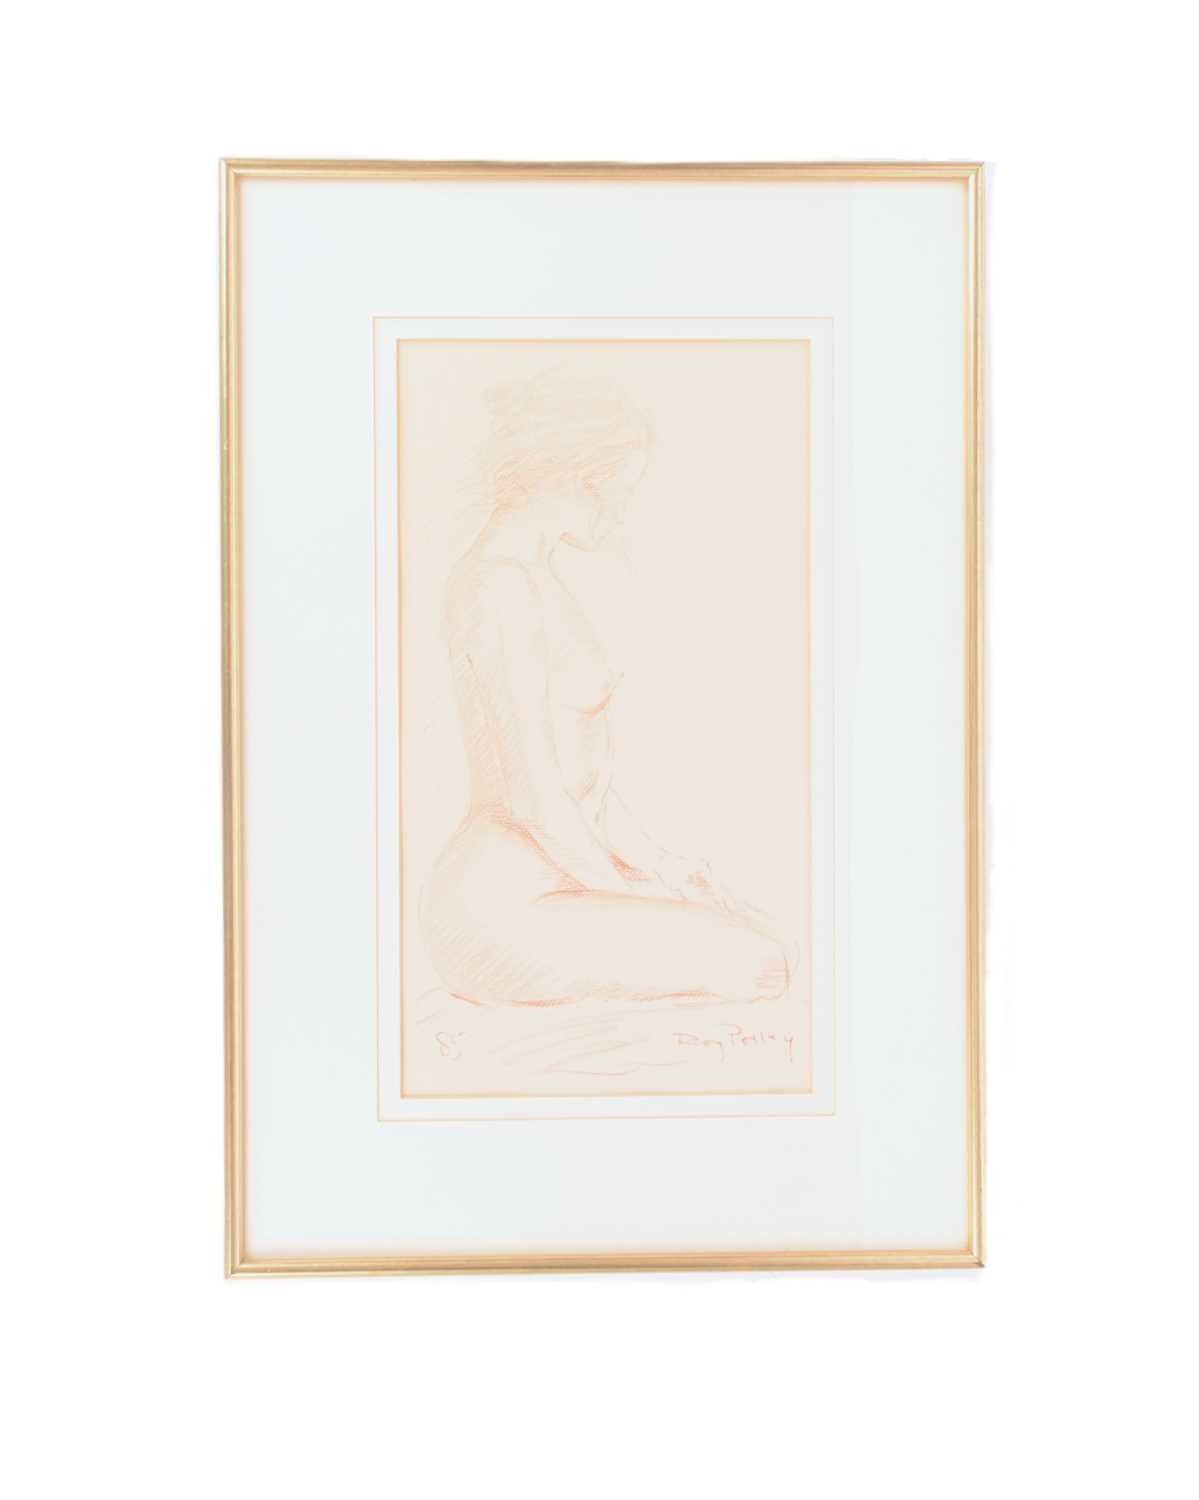 Roy Petley (b. 1950), 'Nude II', signed 'Roy Petley (lower right) dated '85' (lower left), red chalk